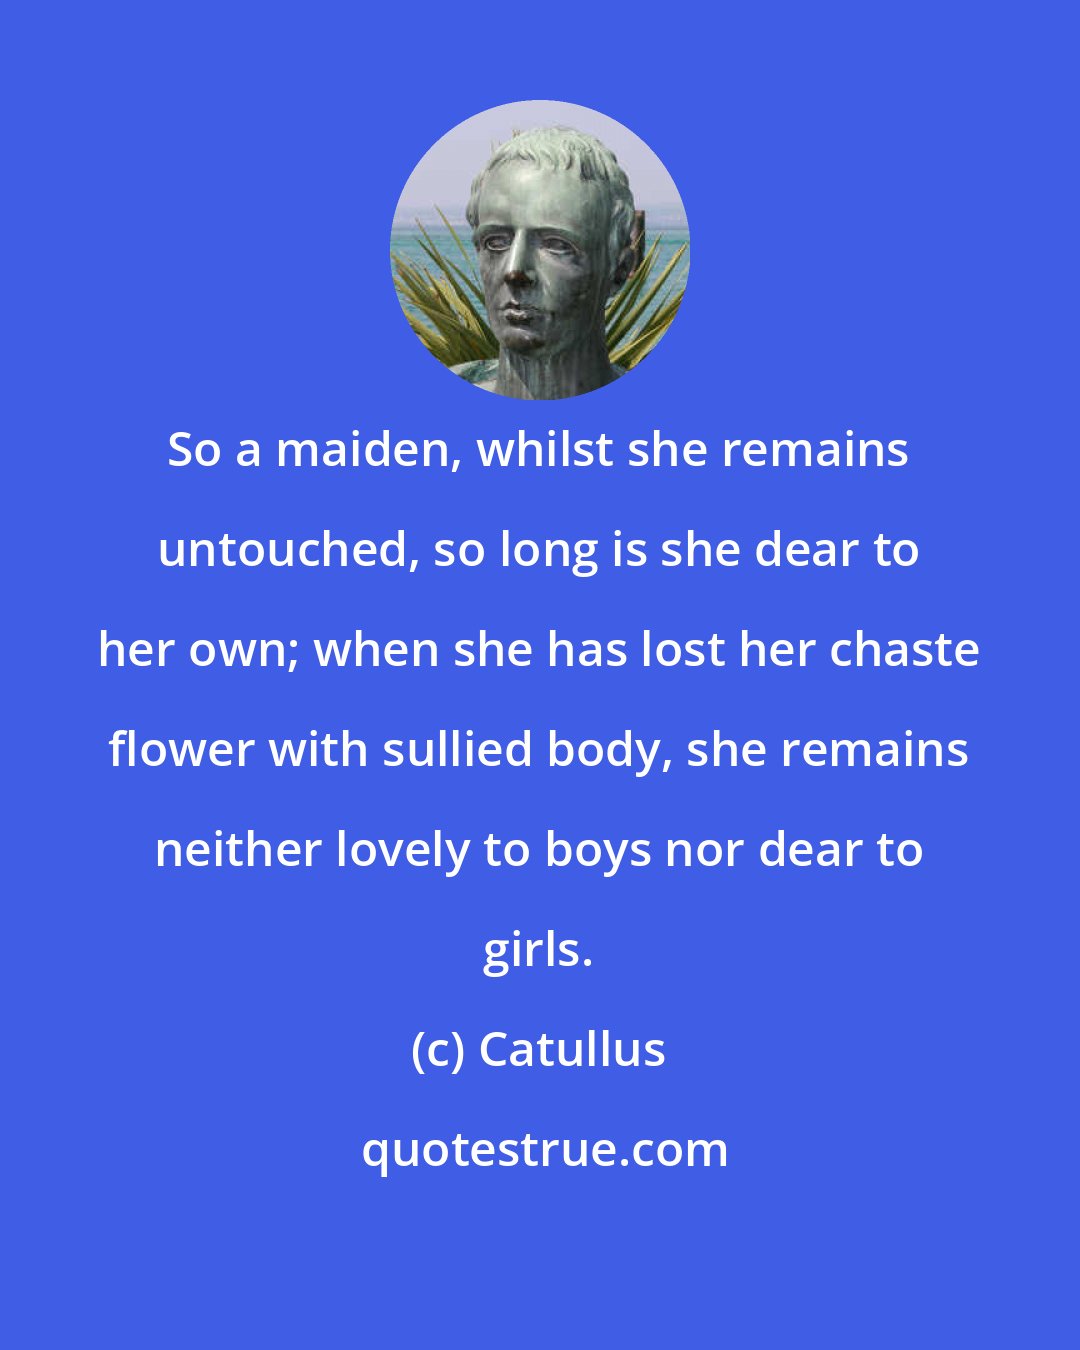 Catullus: So a maiden, whilst she remains untouched, so long is she dear to her own; when she has lost her chaste flower with sullied body, she remains neither lovely to boys nor dear to girls.